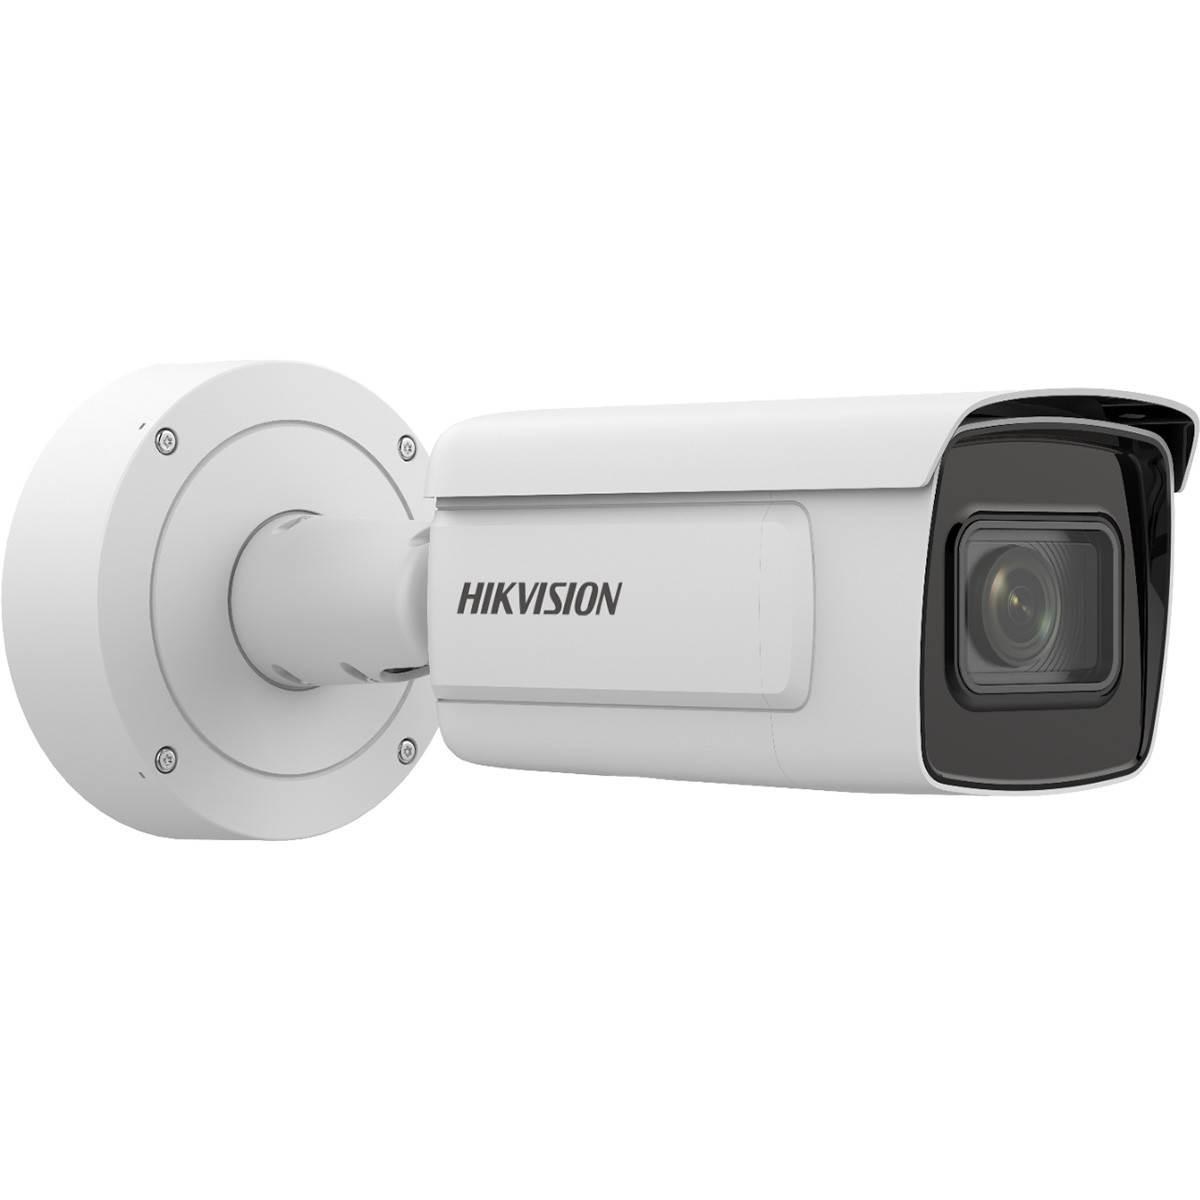 IP-камера Hikvision DS-2CD7A26G0-IZHS (8-32) 98_98.jpg - фото 2